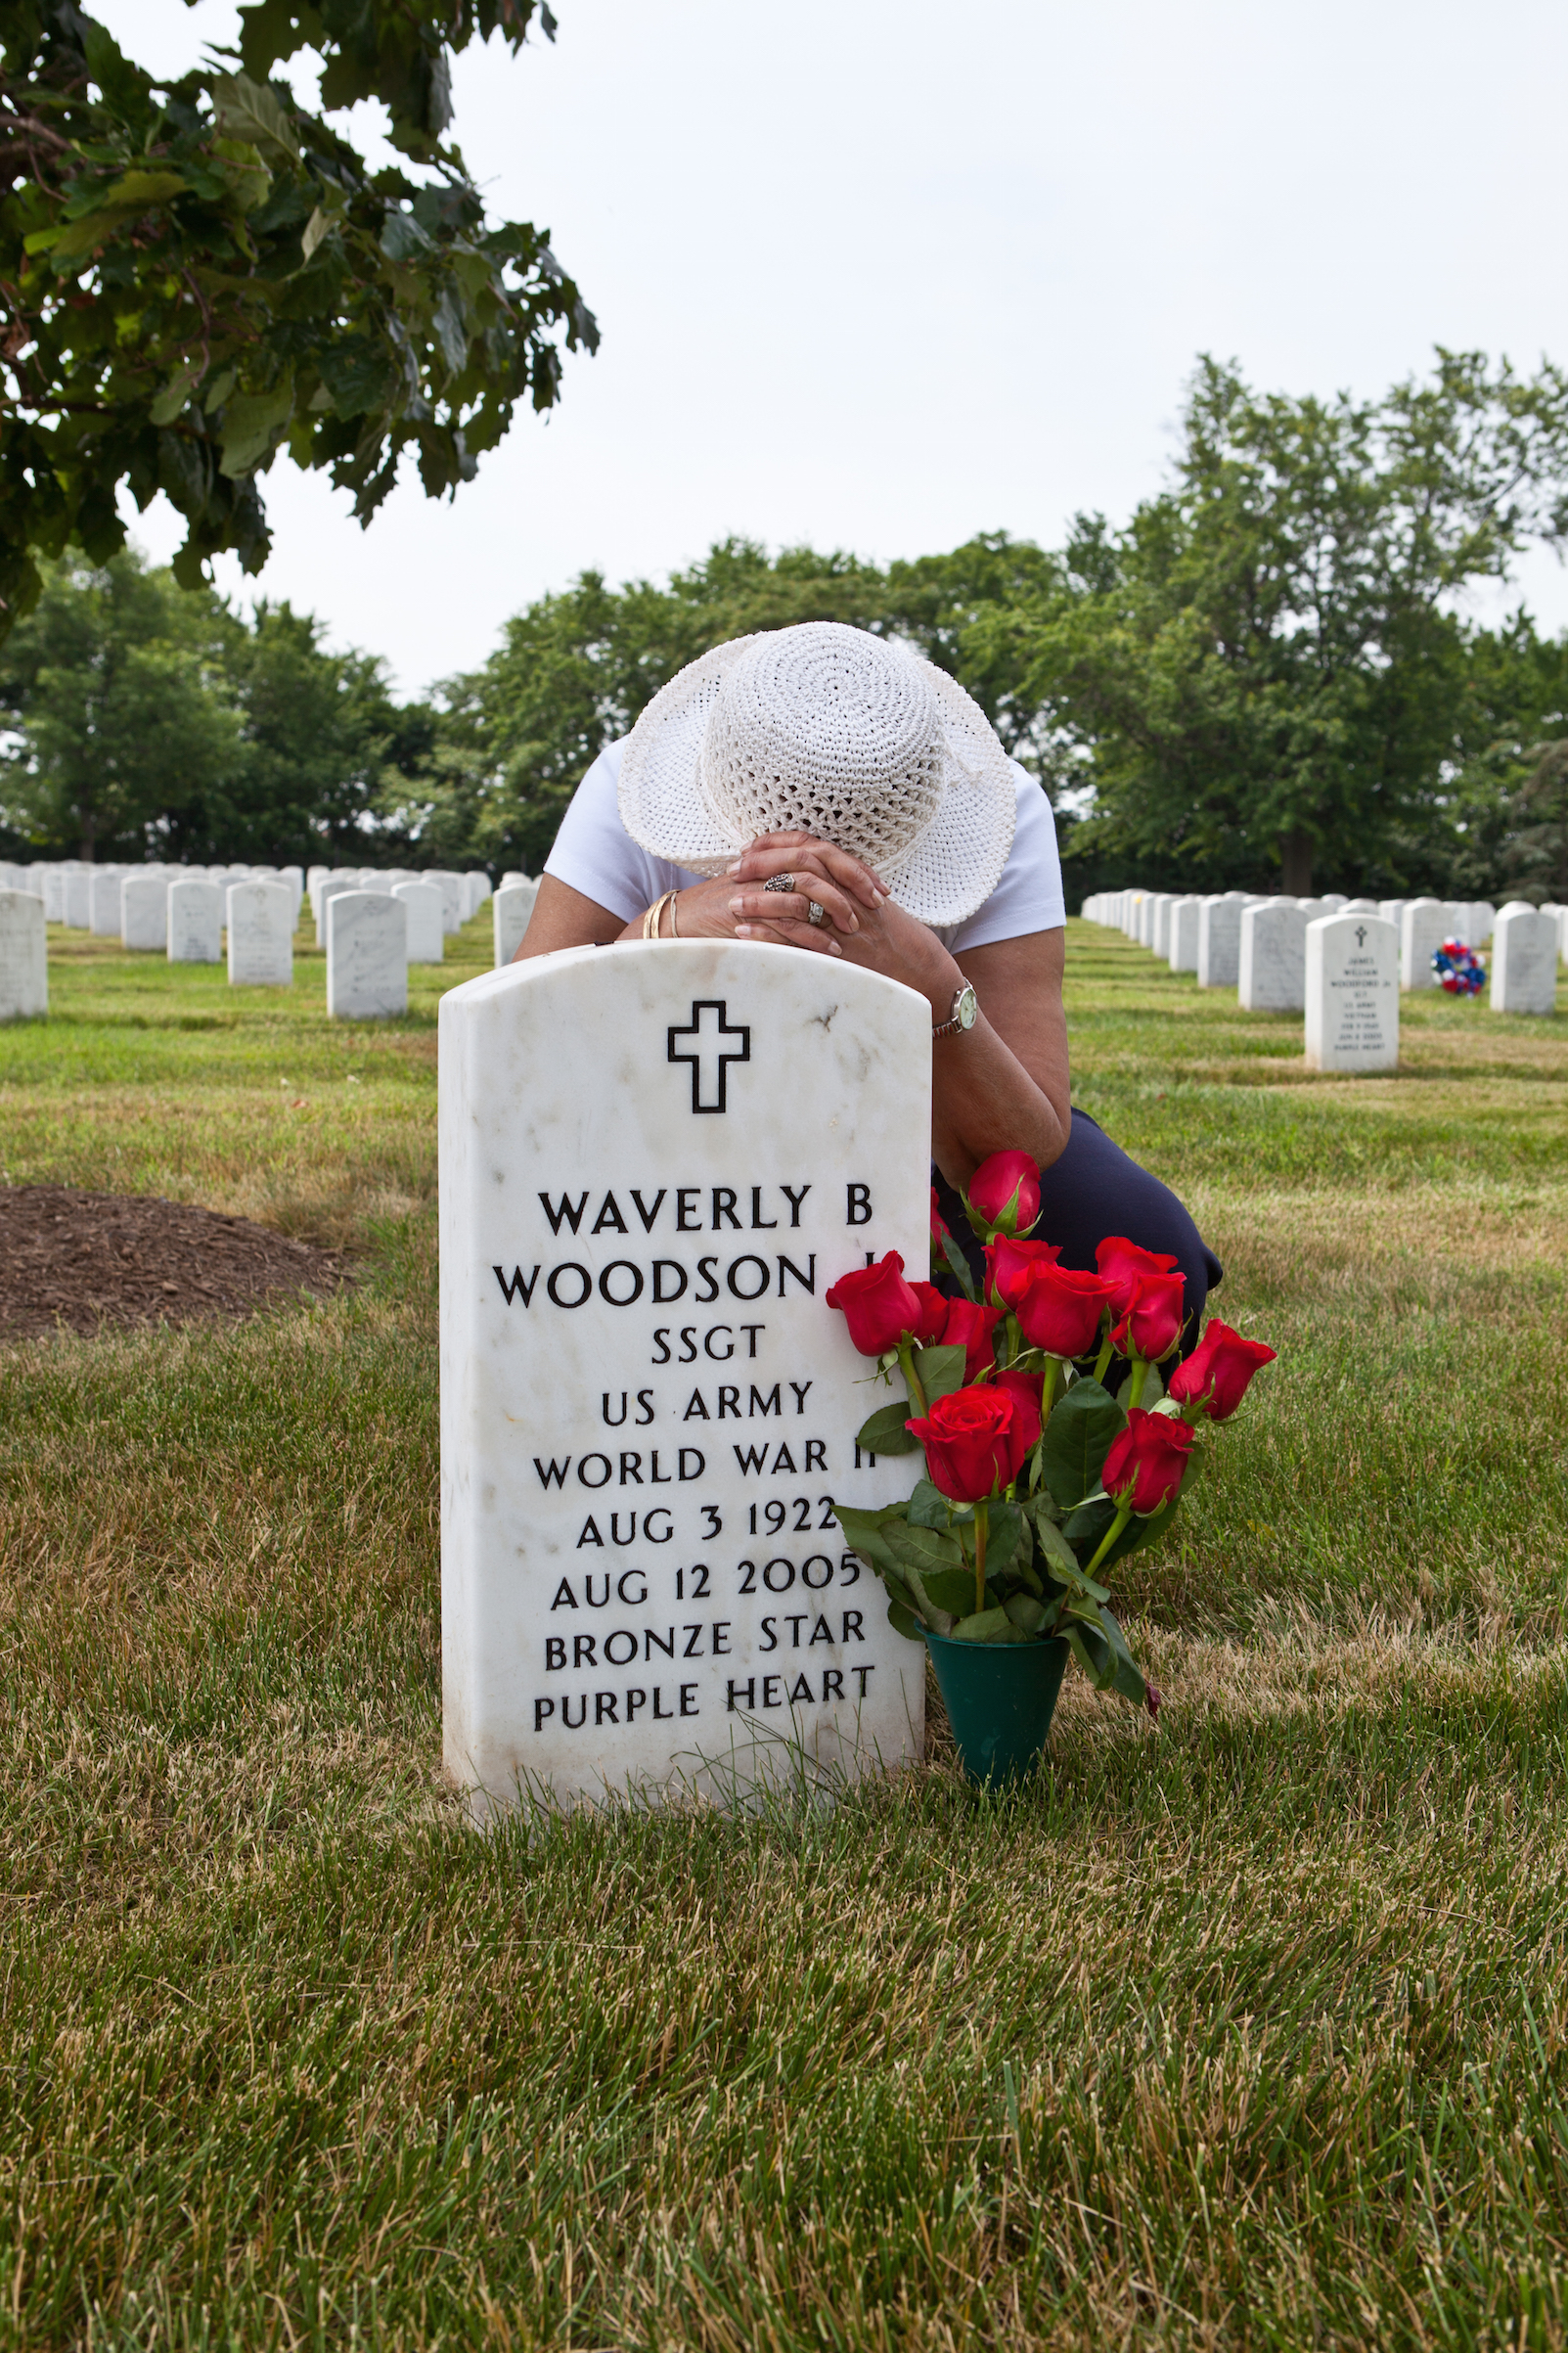 Joann Woodson visits her husband’s grave at Arlington National Cemetery with his favorite red roses. (Linda Hervieux)